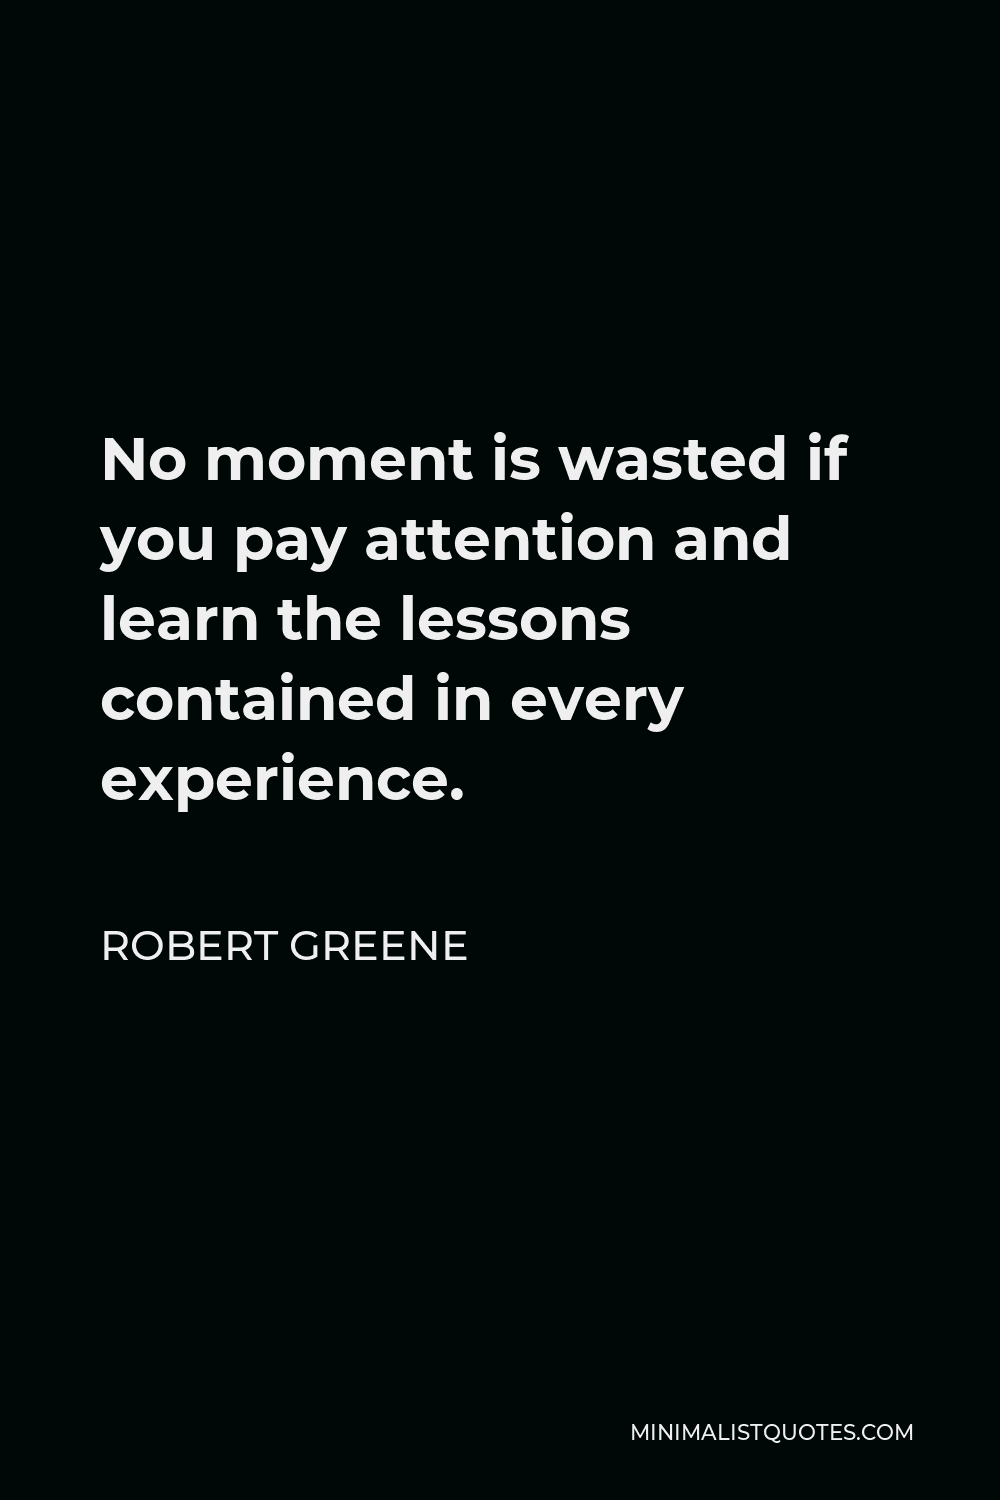 Robert Greene Quote - No moment is wasted if you pay attention and learn the lessons contained in every experience.